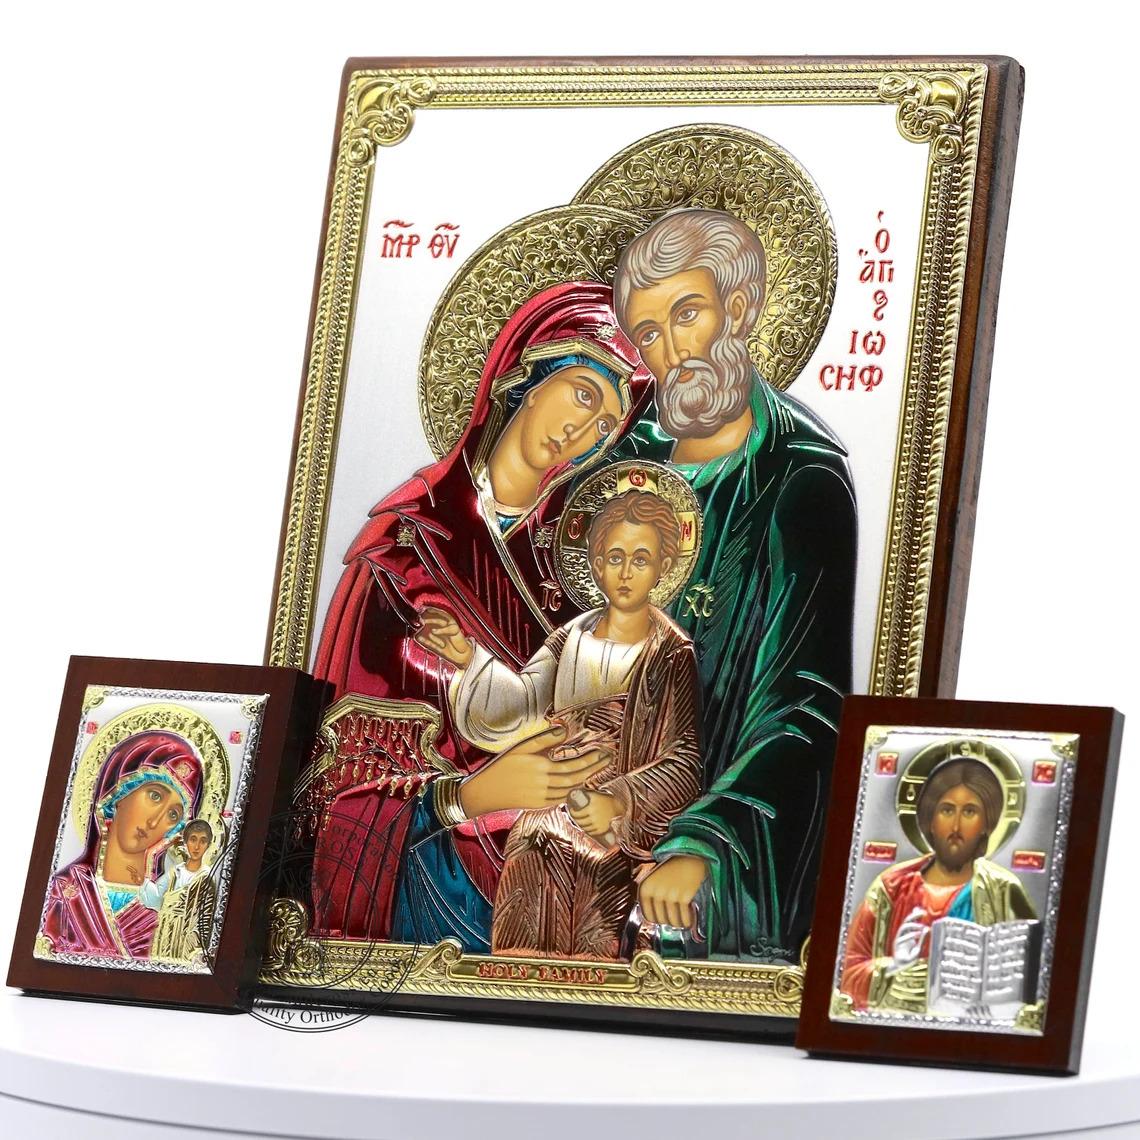 The Holy Family + 2 Small Icons Set. Christian Icon Silver Plated .999 ( 5.12″ X 7.1″ ) 13cm X 18cm. B373|The Holy Family + 2 Small Icons Set. Christian Icon Silver Plated .999 ( 5.12″ X 7.1″ ) 13cm X 18cm. B373|The Holy Family + 2 Small Icons Set. Christian Icon Silver Plated .999 ( 5.12″ X 7.1″ ) 13cm X 18cm. B373|The Holy Family + 2 Small Icons Set. Christian Icon Silver Plated .999 ( 5.12″ X 7.1″ ) 13cm X 18cm. B373